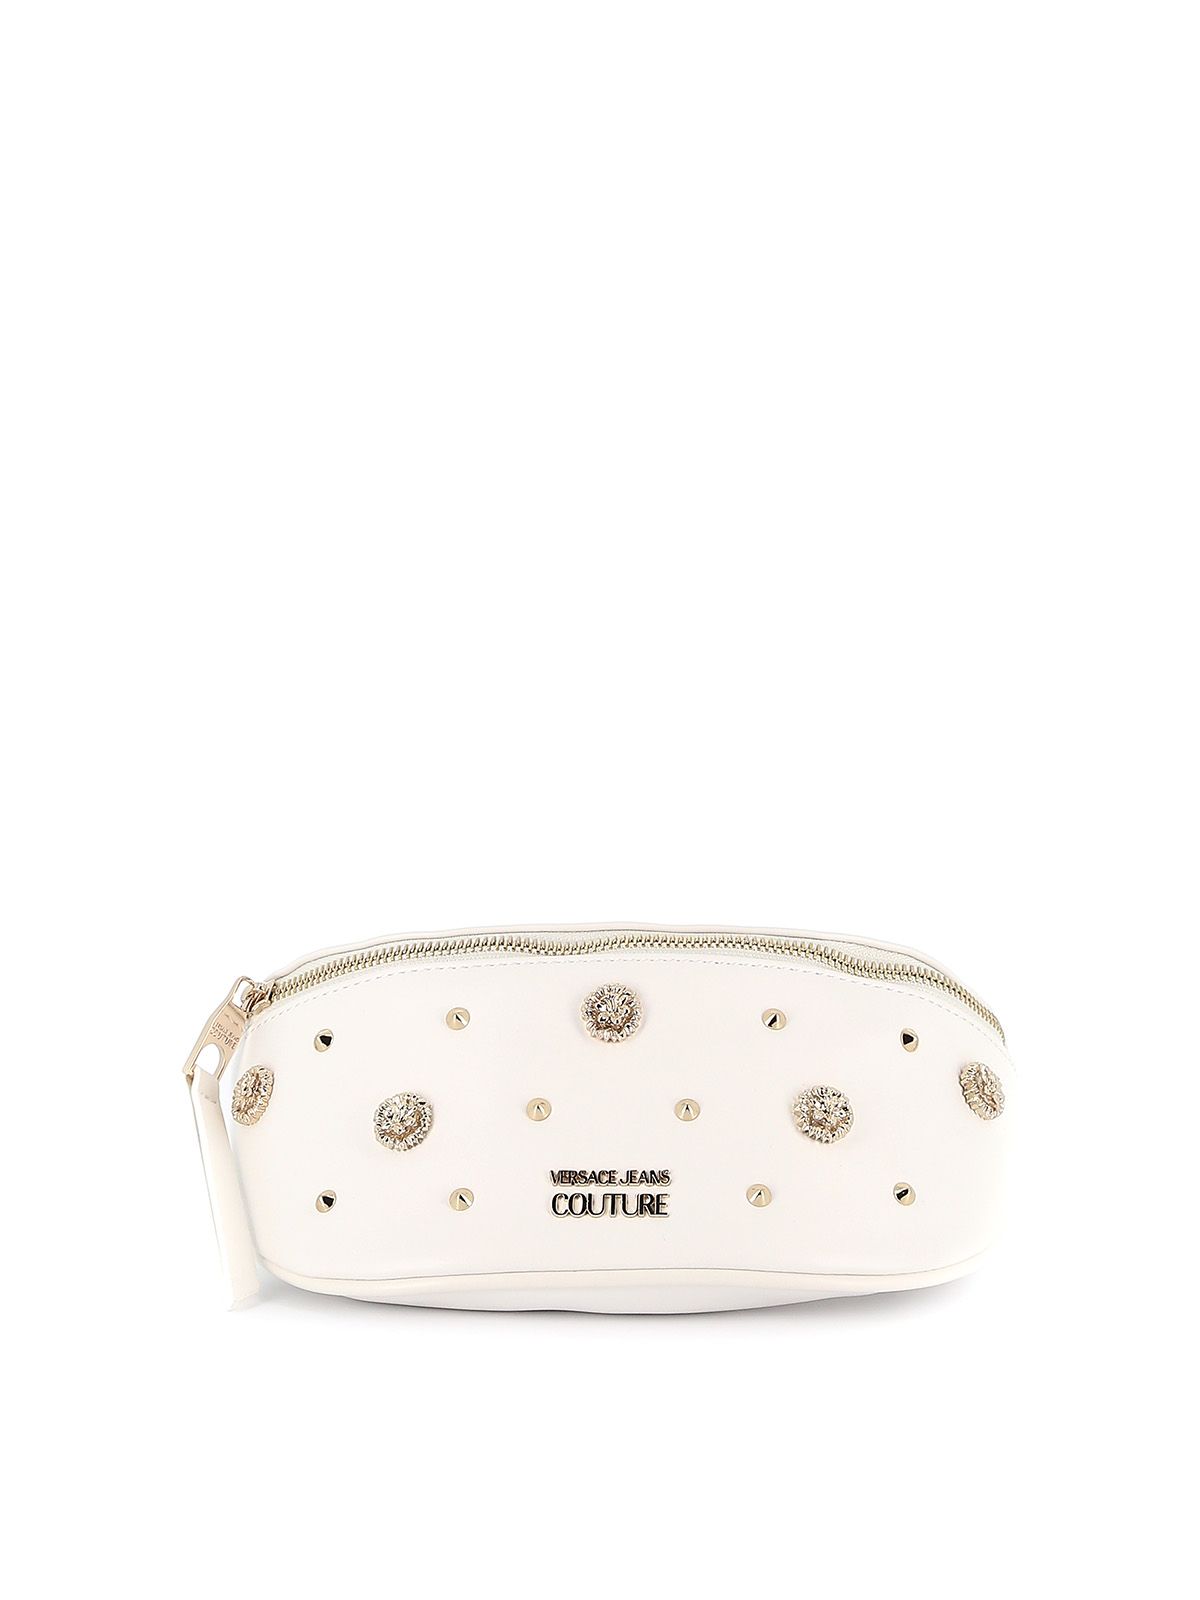 Versace Jeans Studded Faux Leather Belt Bag In White